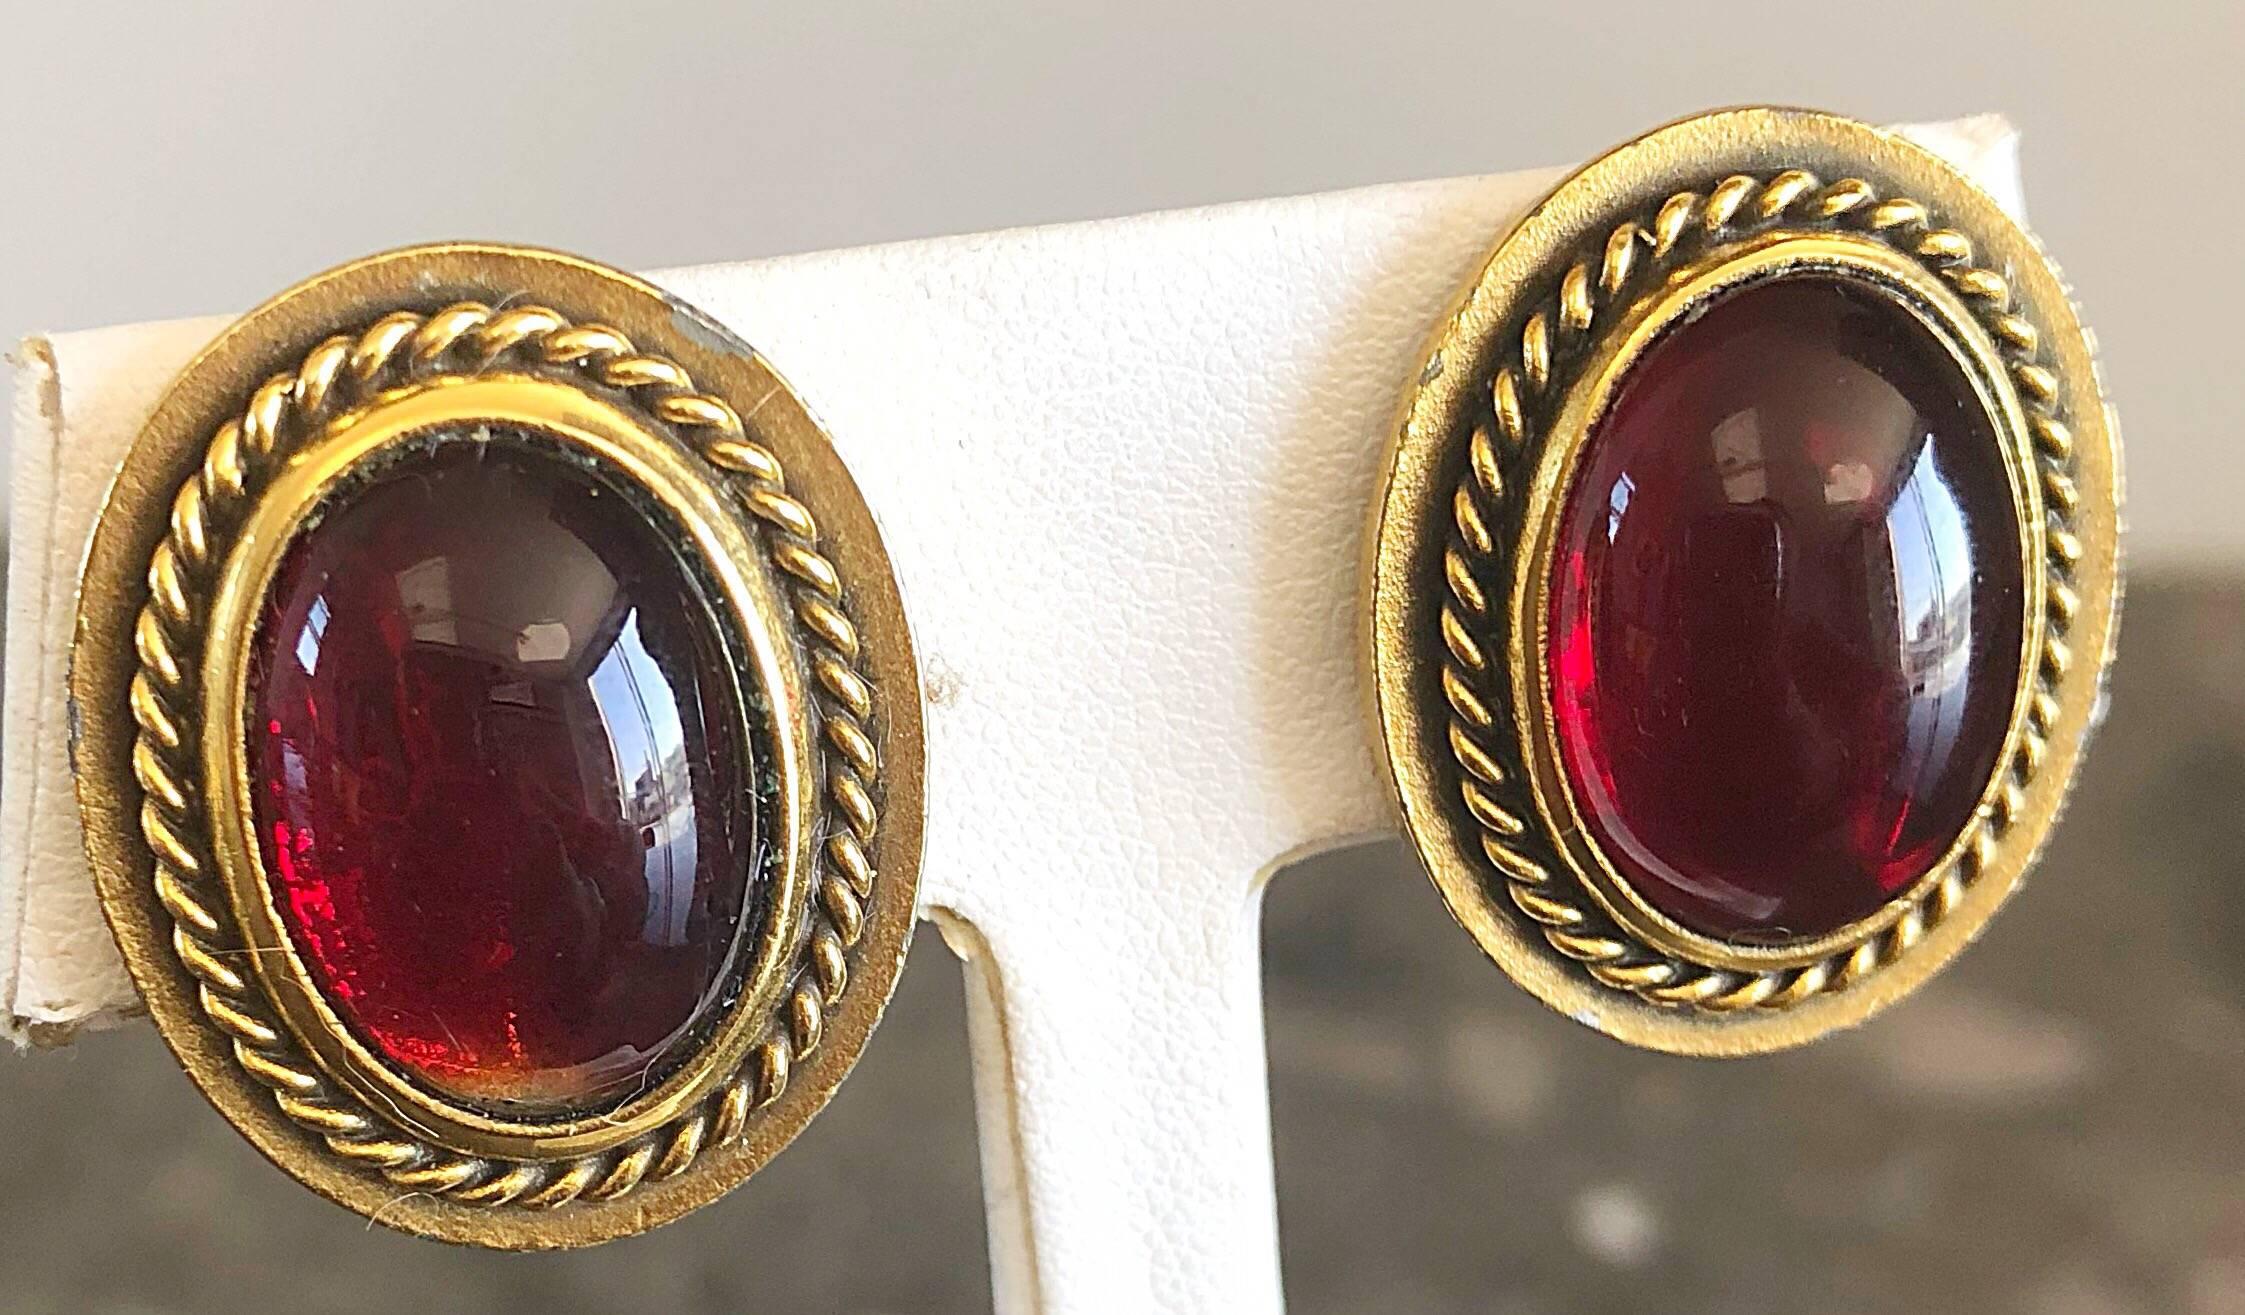 Classic large vintage YVES SAINT LAURENT ruby red gripoix and gold round domed clip-on earrings. Each earring features a large round ruby red Gripoix glass dome. Gold edges have a rope textured backing. Can easily be dressed up or down. Great with